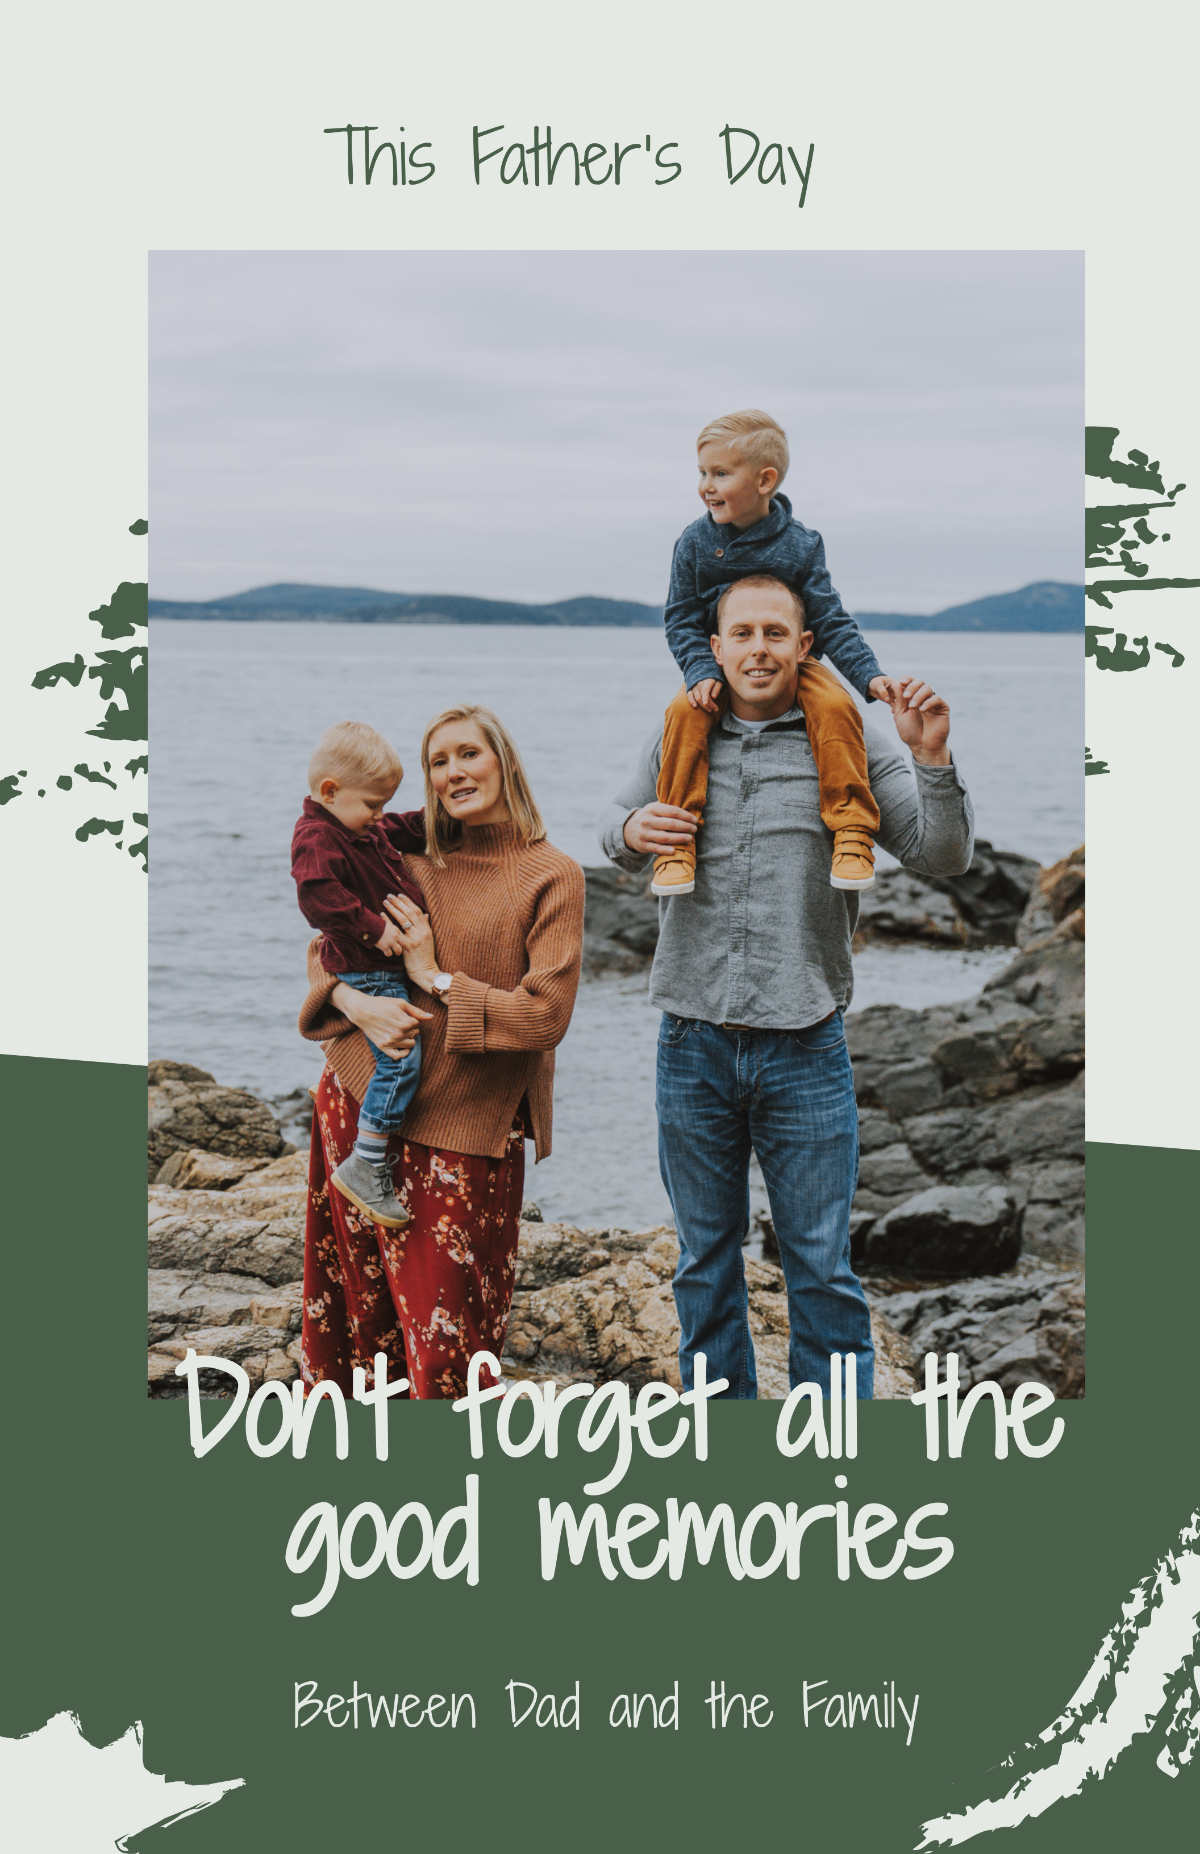 Father's Day Photo Poster Template